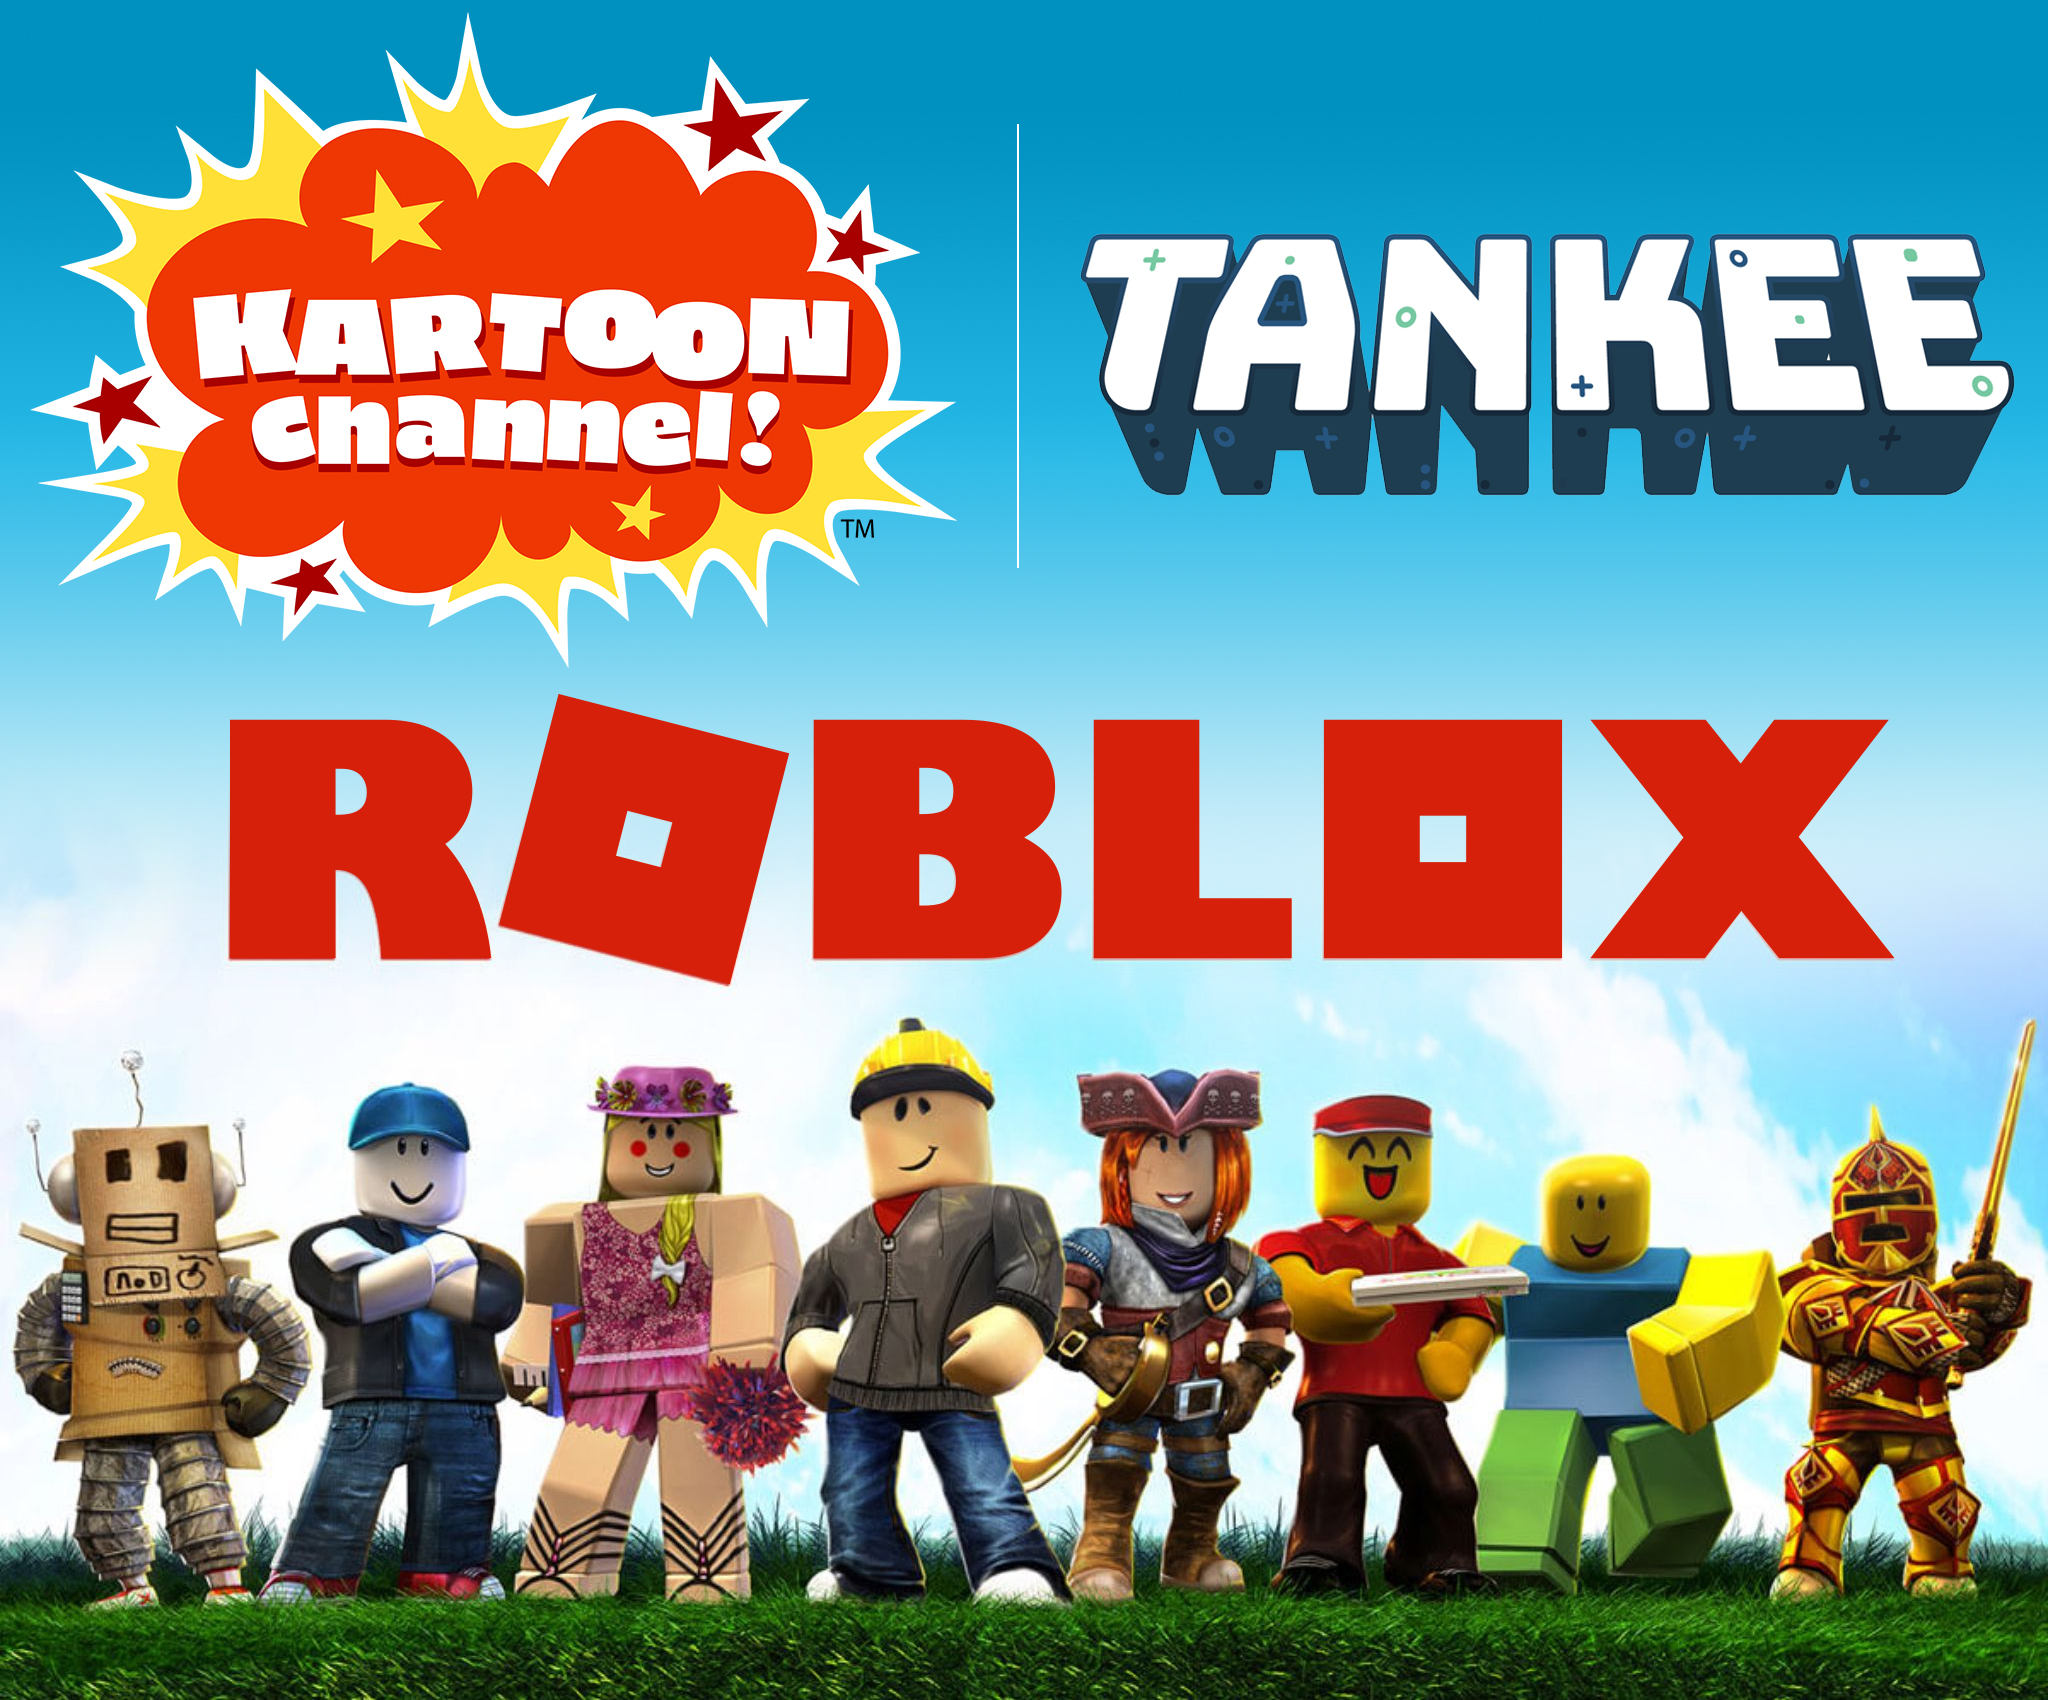 Roblox Coming To Kartoon Channel - roblox movie on netflix